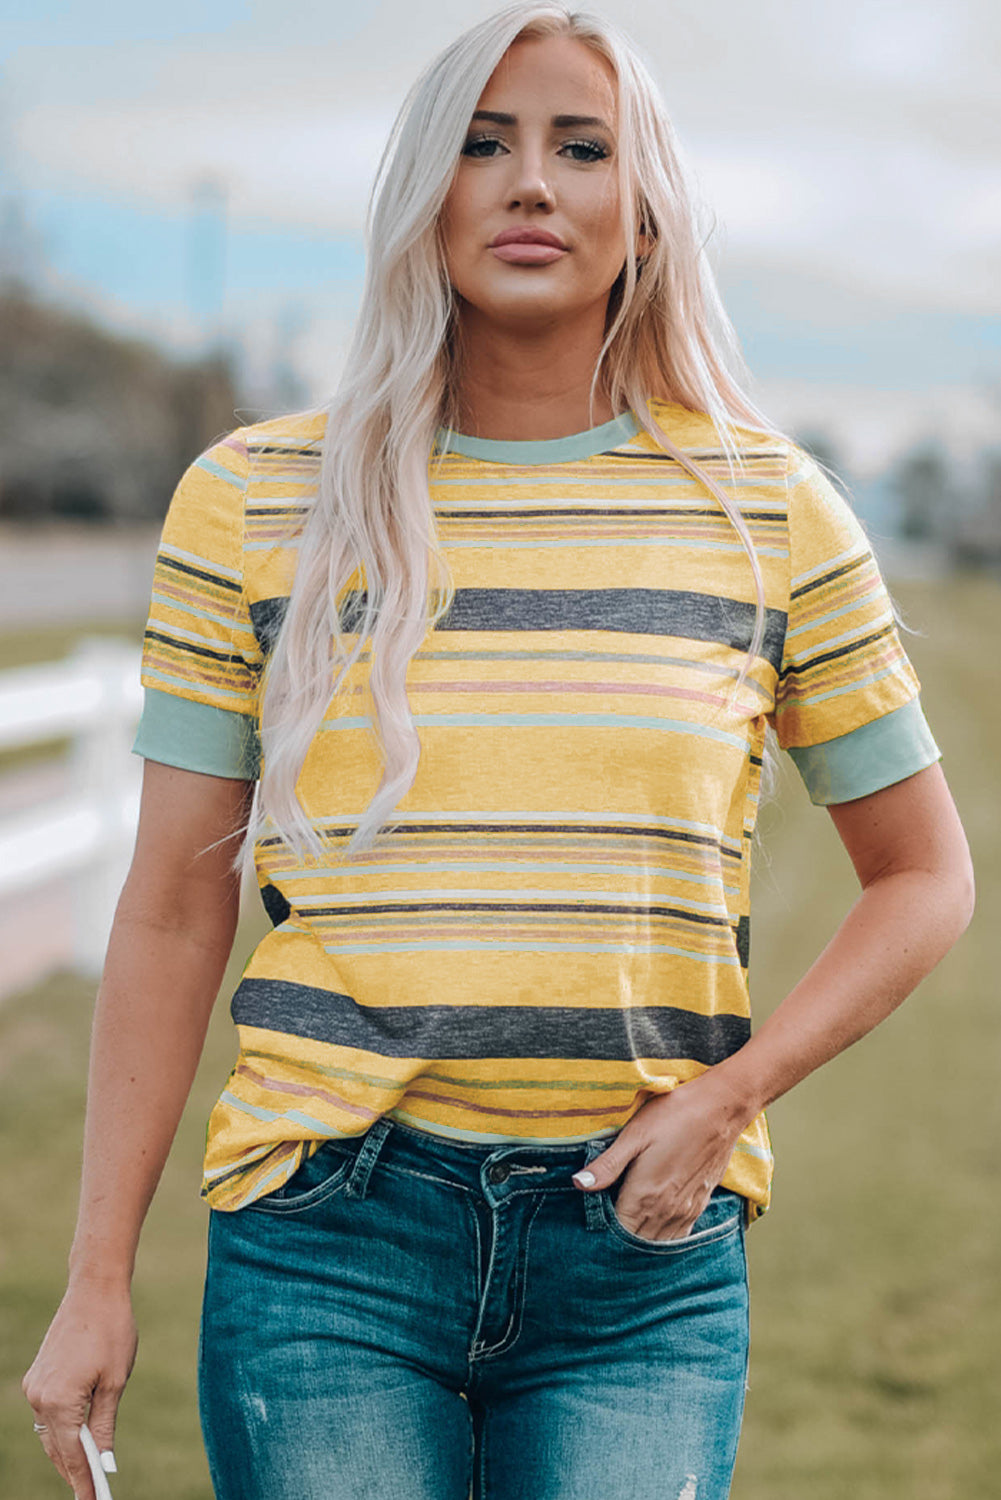 Multicolored Striped Round Neck Tee Shirt - Multi / S - T-Shirts - Shirts & Tops - 1 - 2024